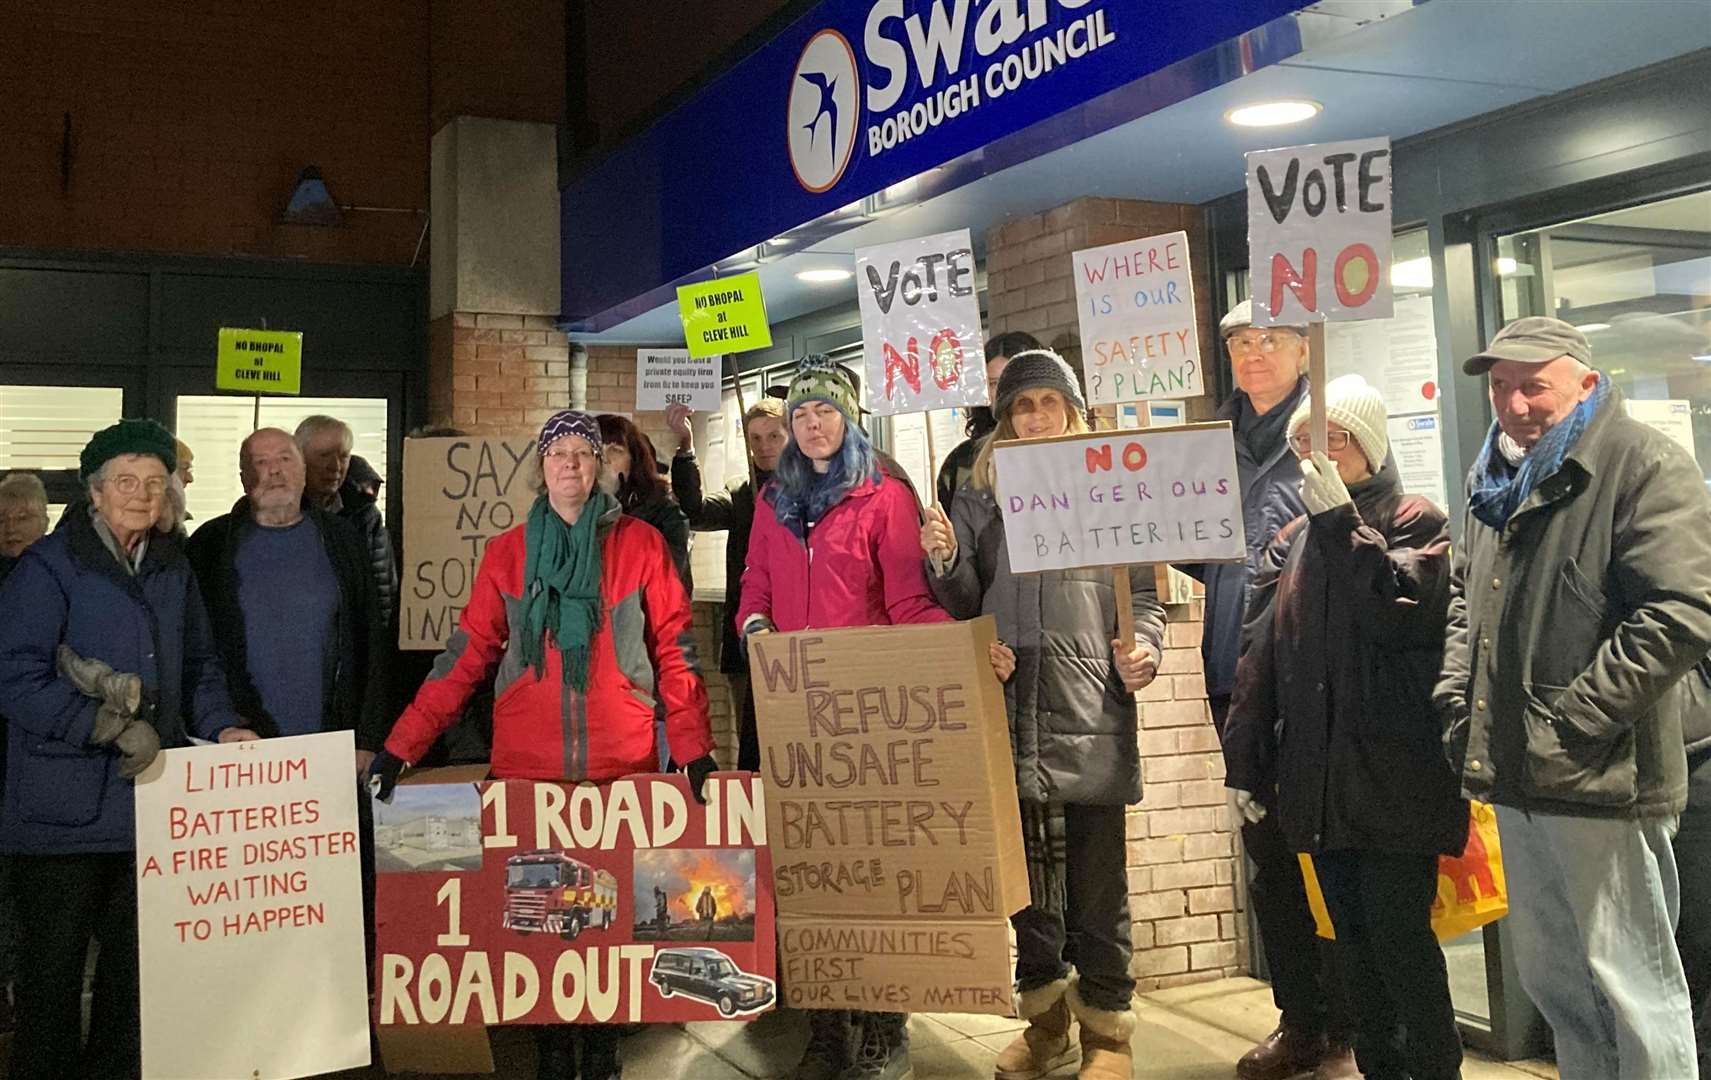 Protesters outside Swale House